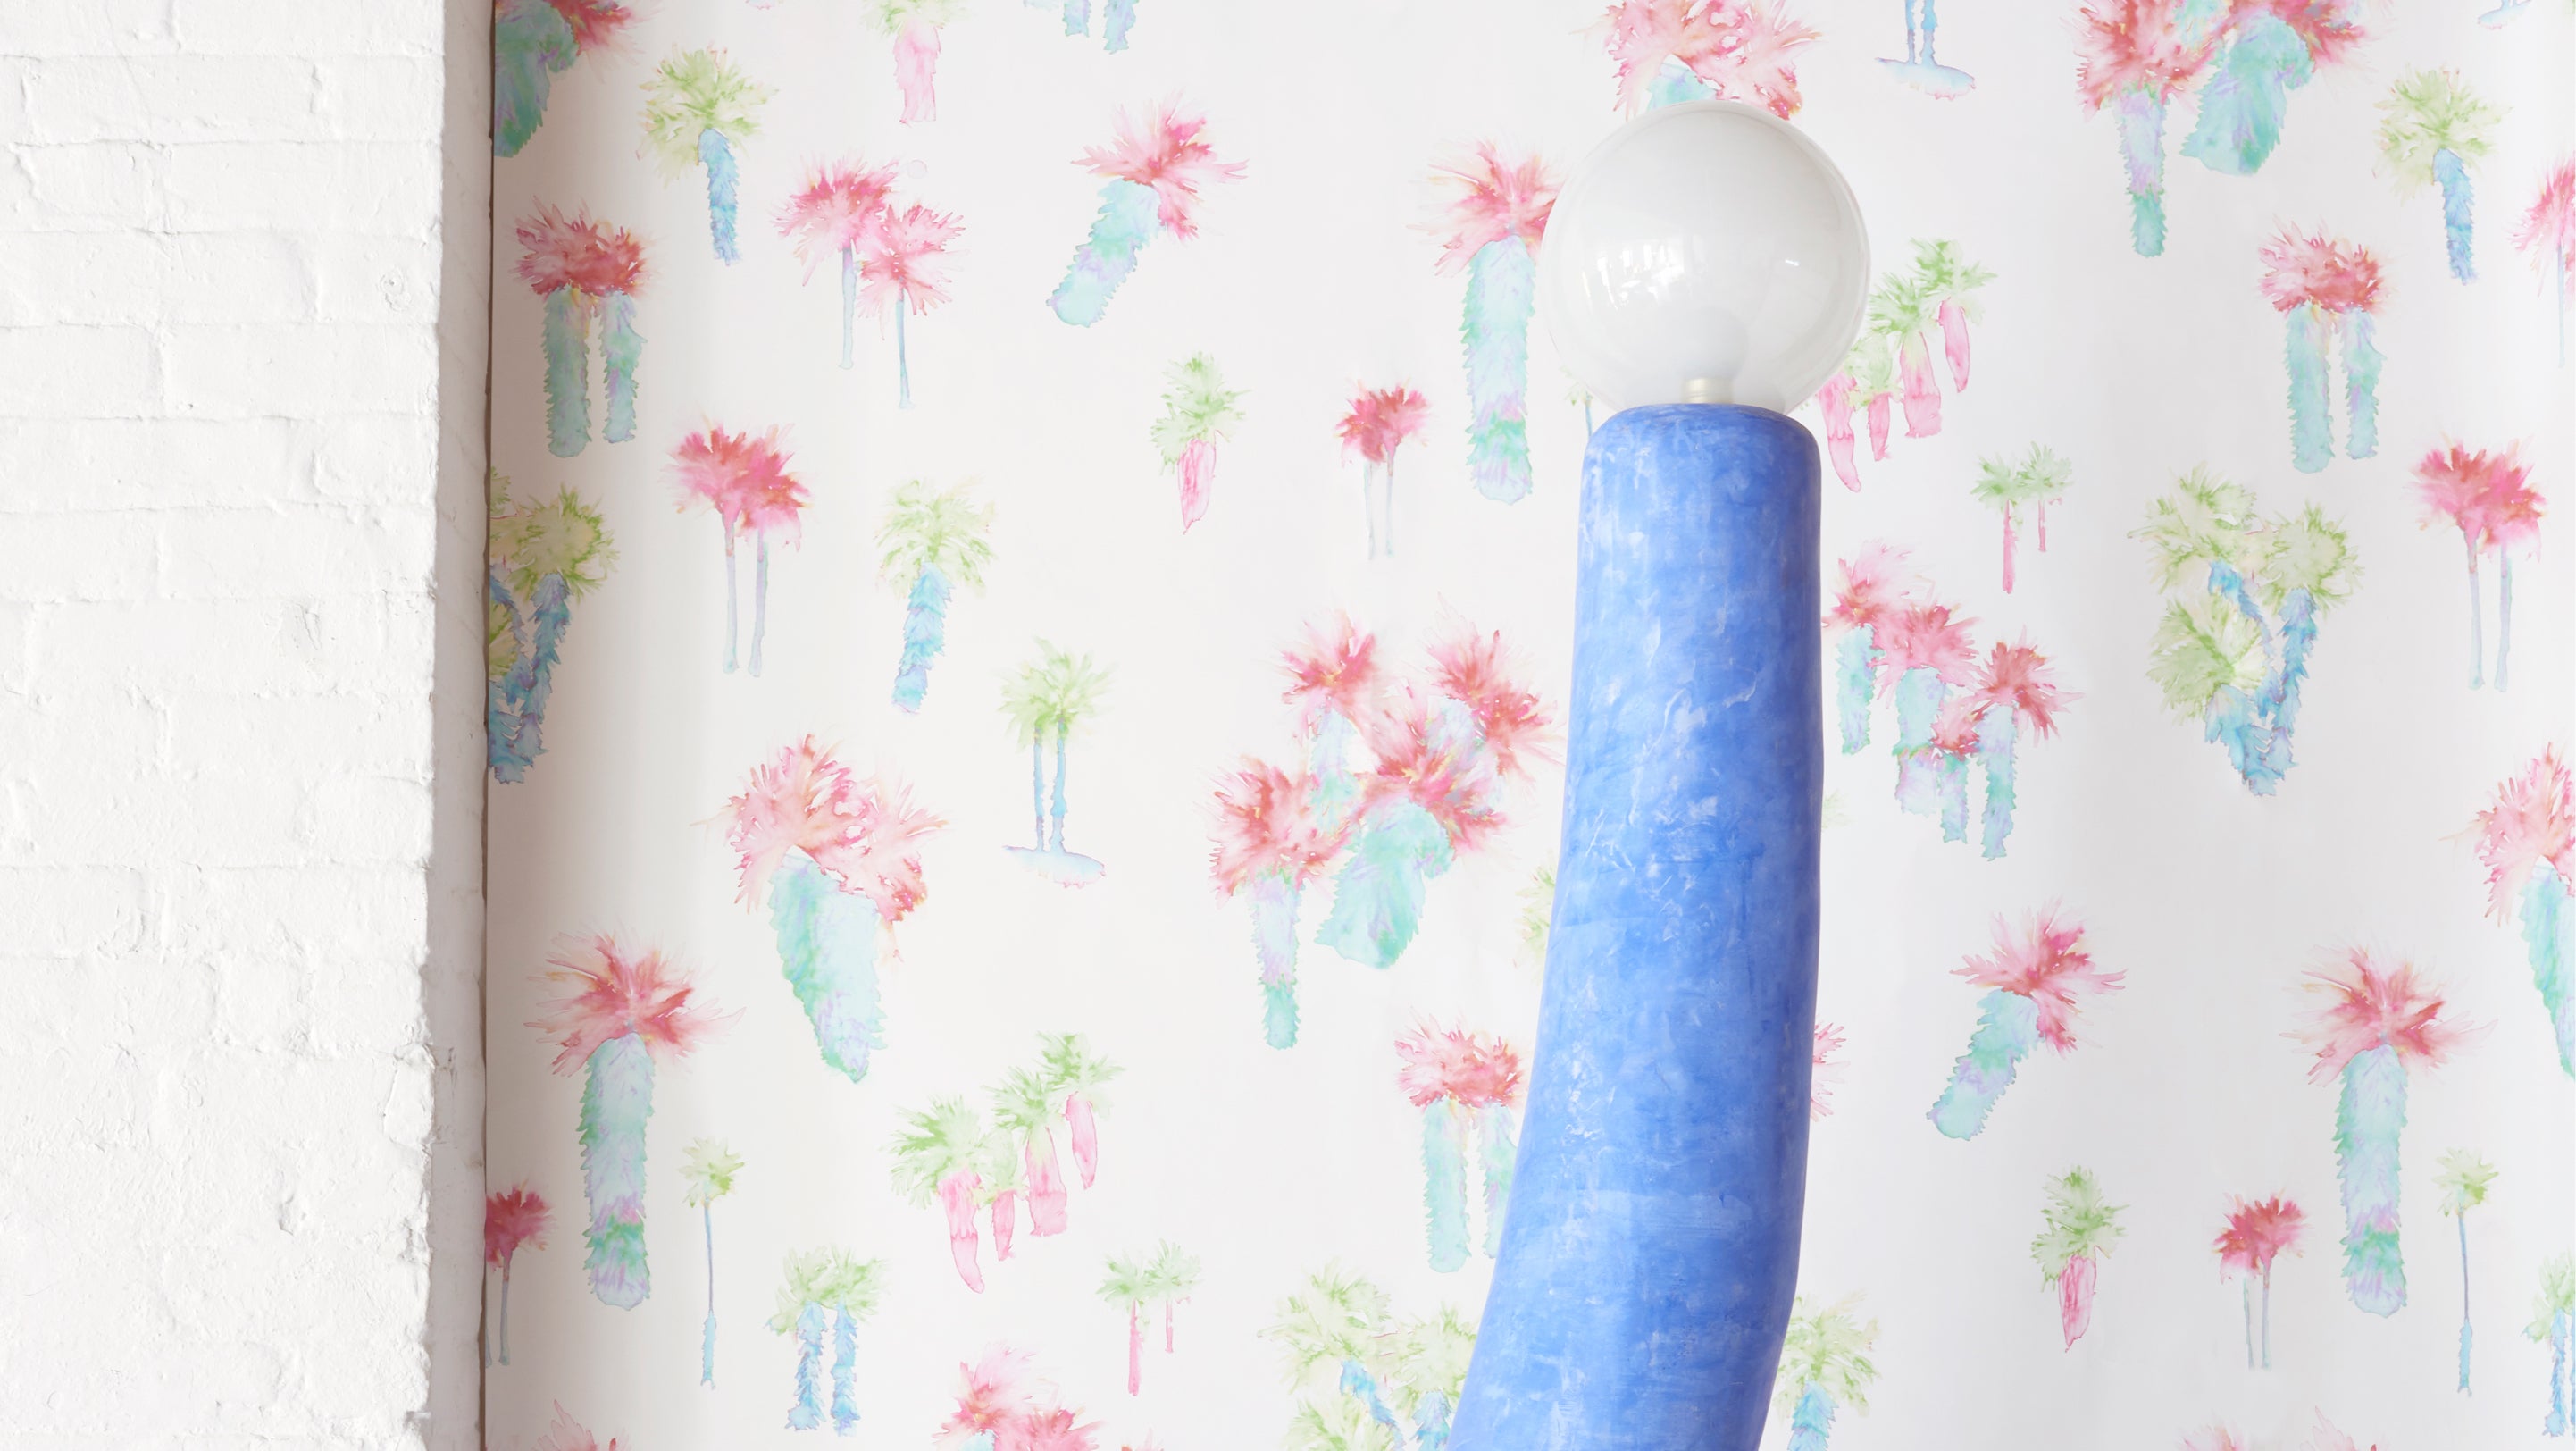 A blue lamp in front of a wallpaper with cactus plants can create a vibrant and soothing ambiance